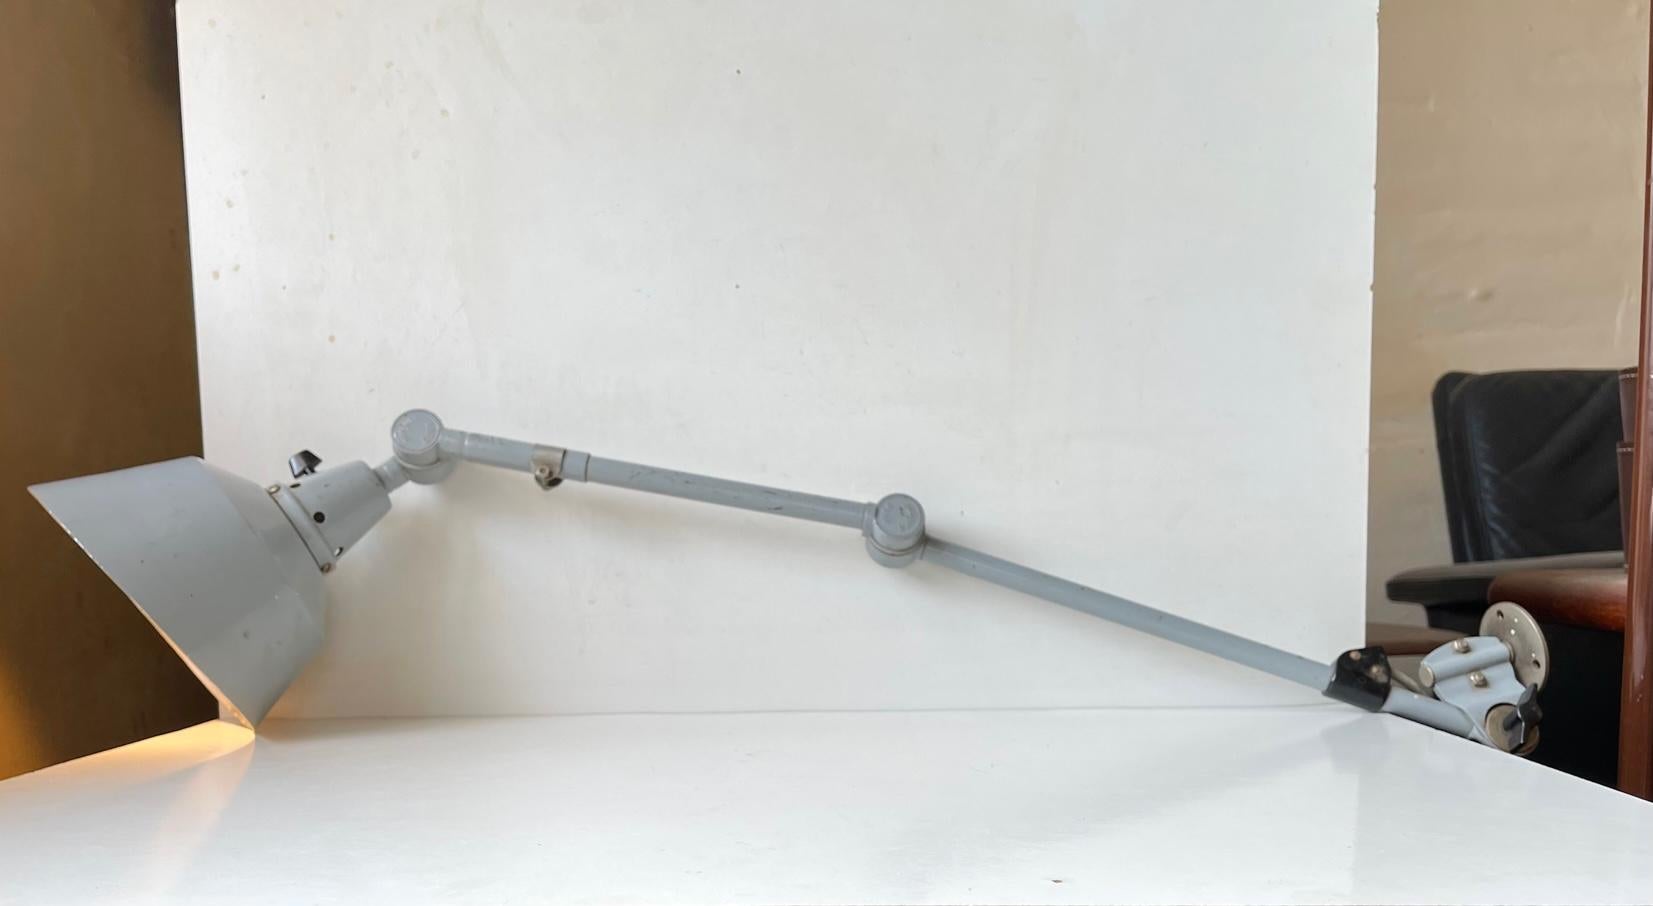 German Articulated Grey Industrial Wall Sconce by Curt Fischer for Midgard, 1930s For Sale